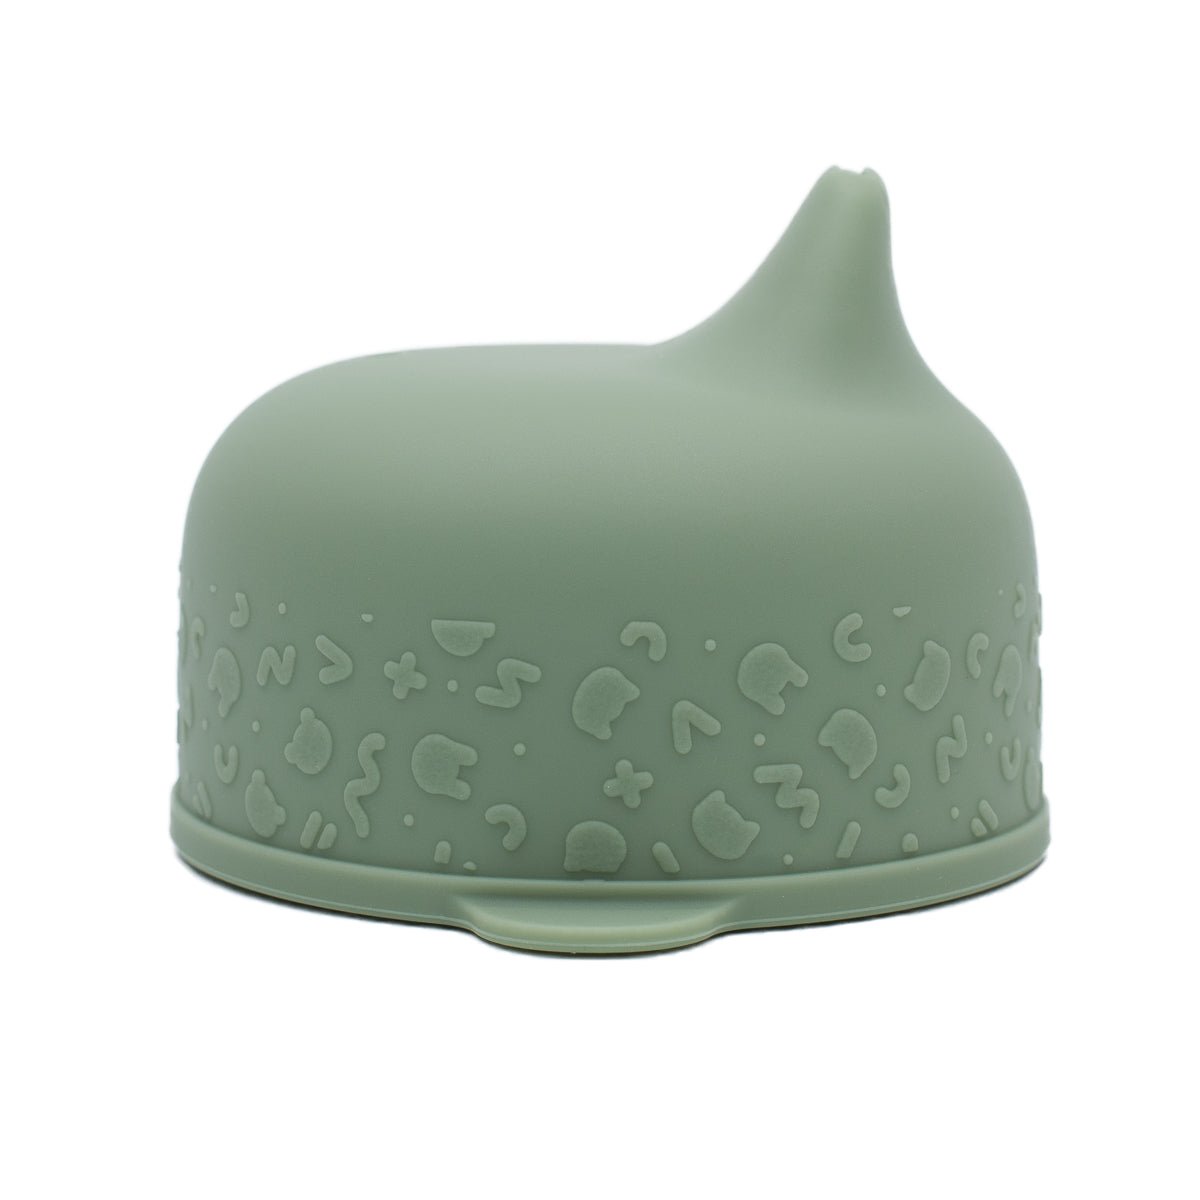 The Sippie Lid - The No-Spill Sippy Cup Lid with Straw in Sage